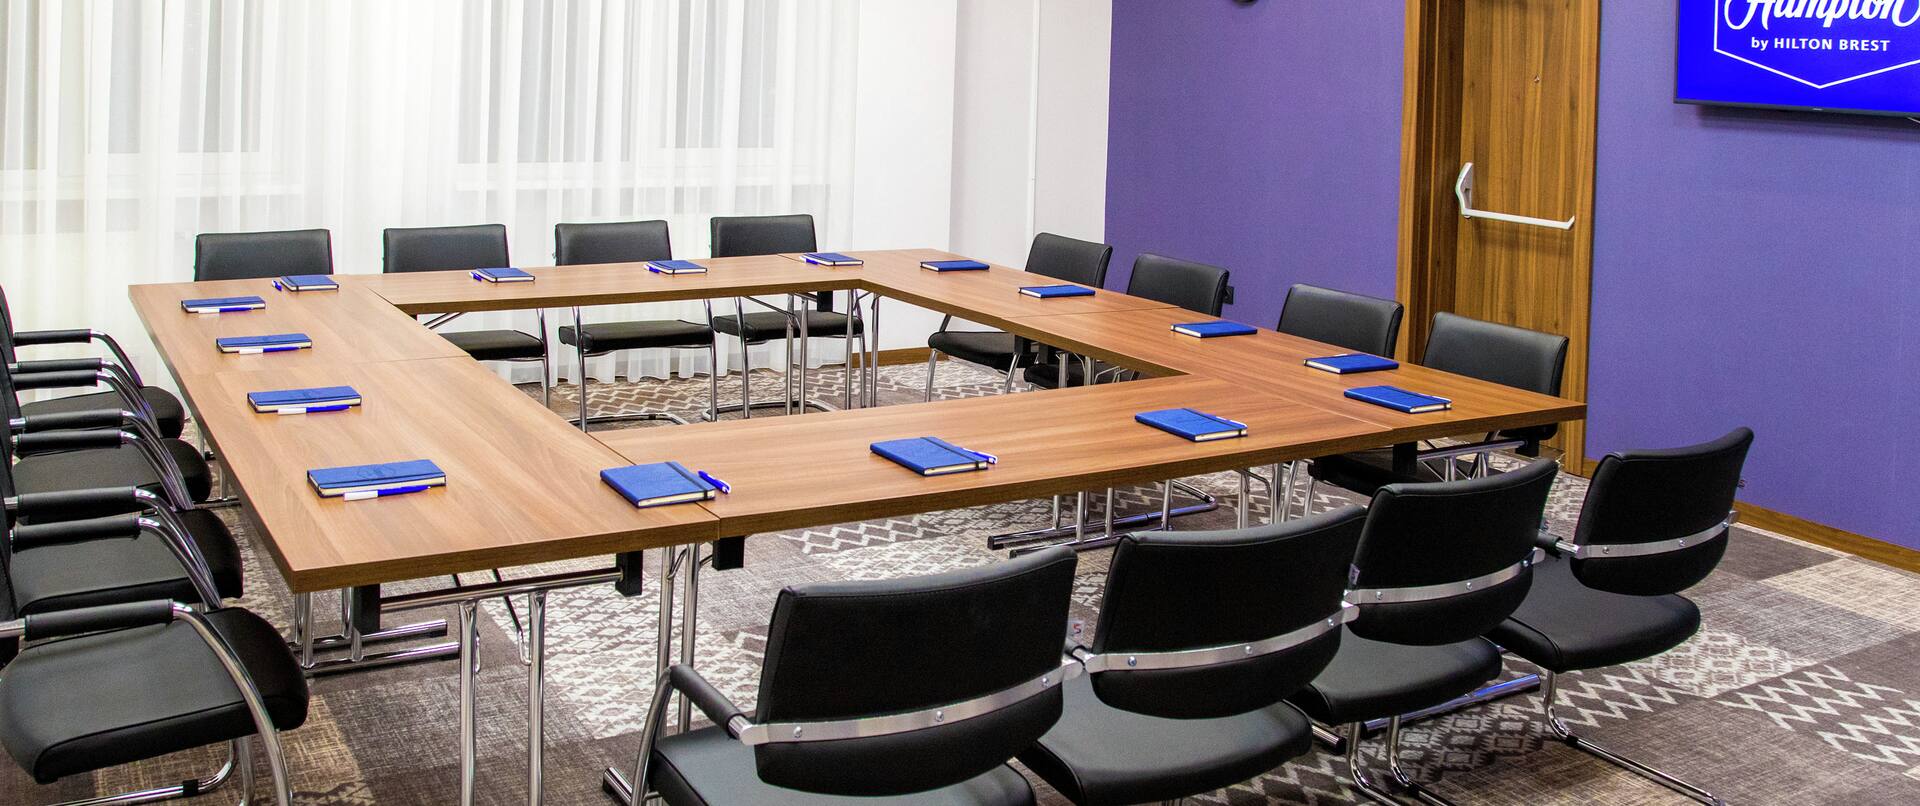 Chairs and Table in Hollow Square Style Setup in Meeting Room